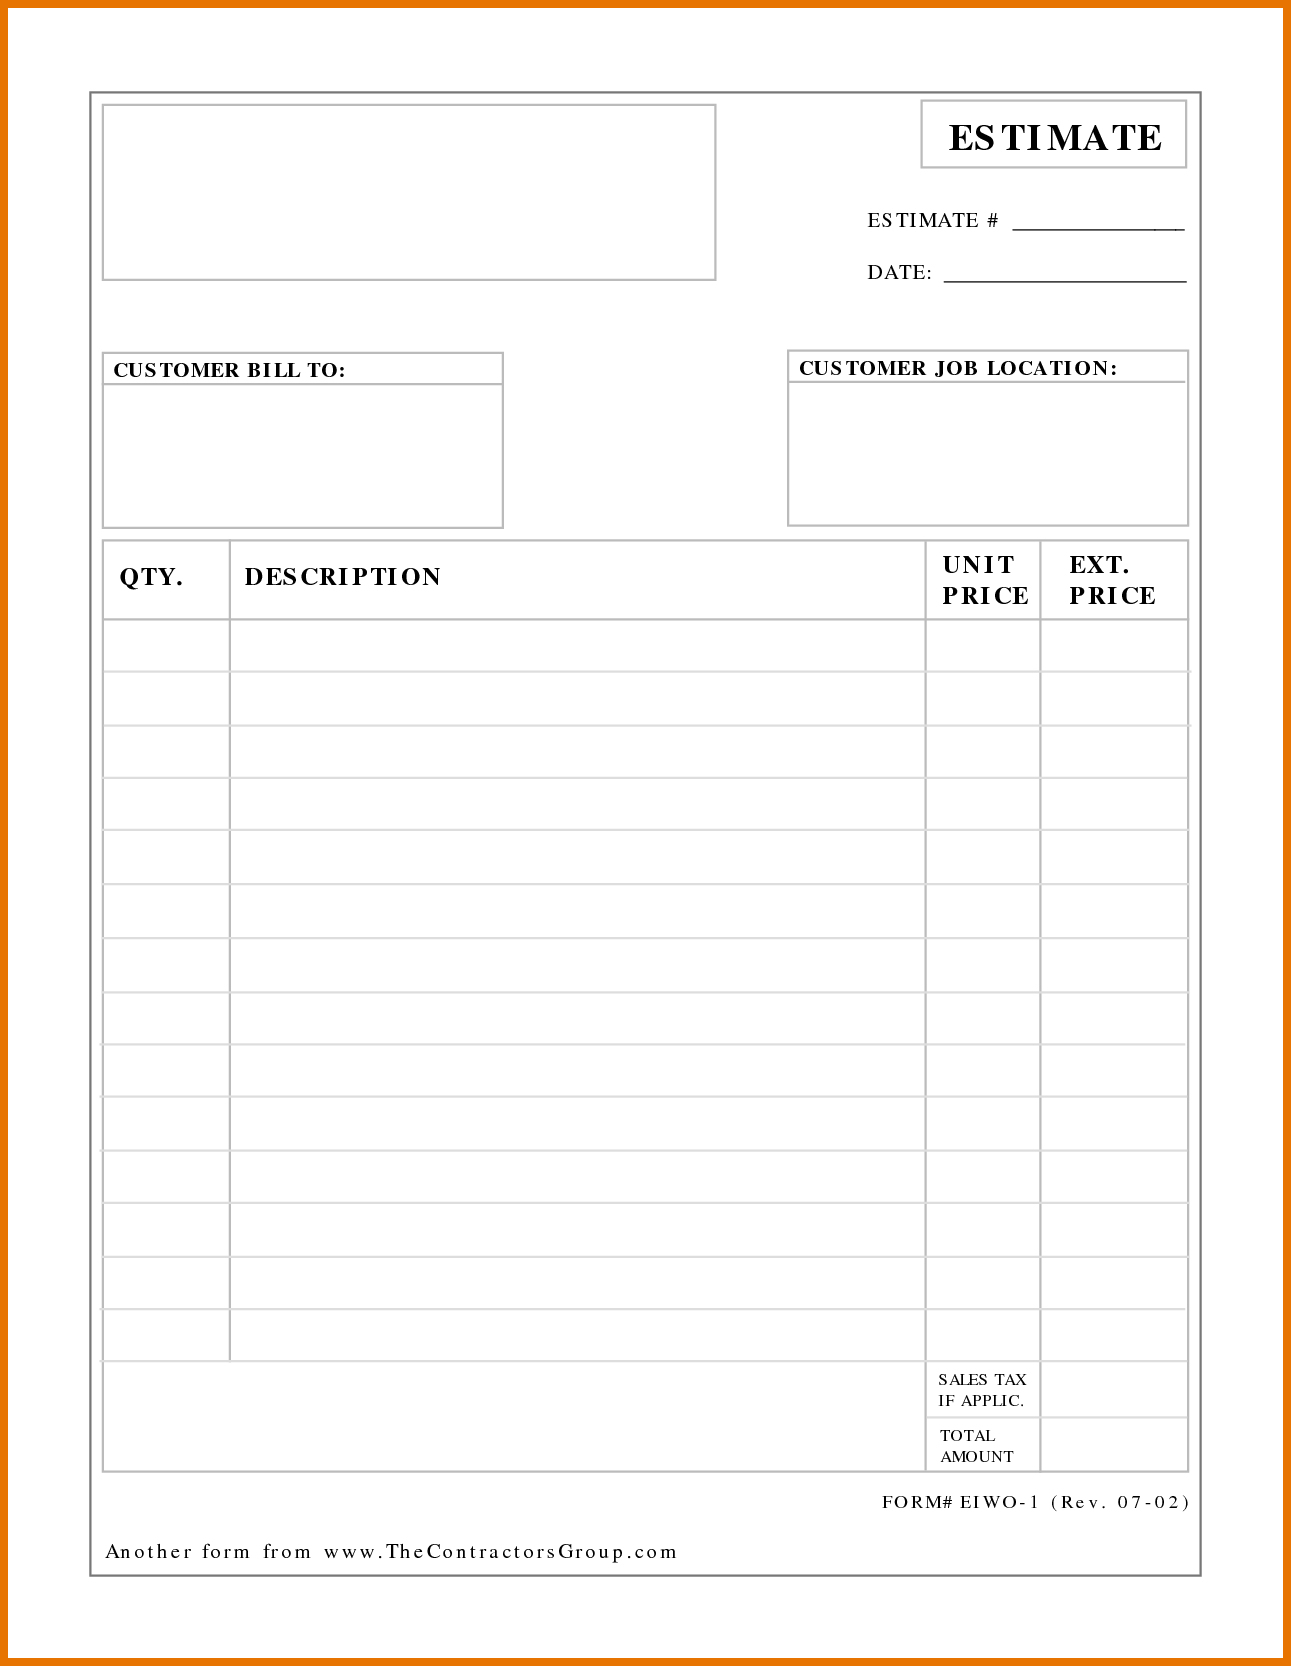 008 Template Ideas Free Job Estimate Quote Image Gallery Website - Free Printable Job Quote Forms